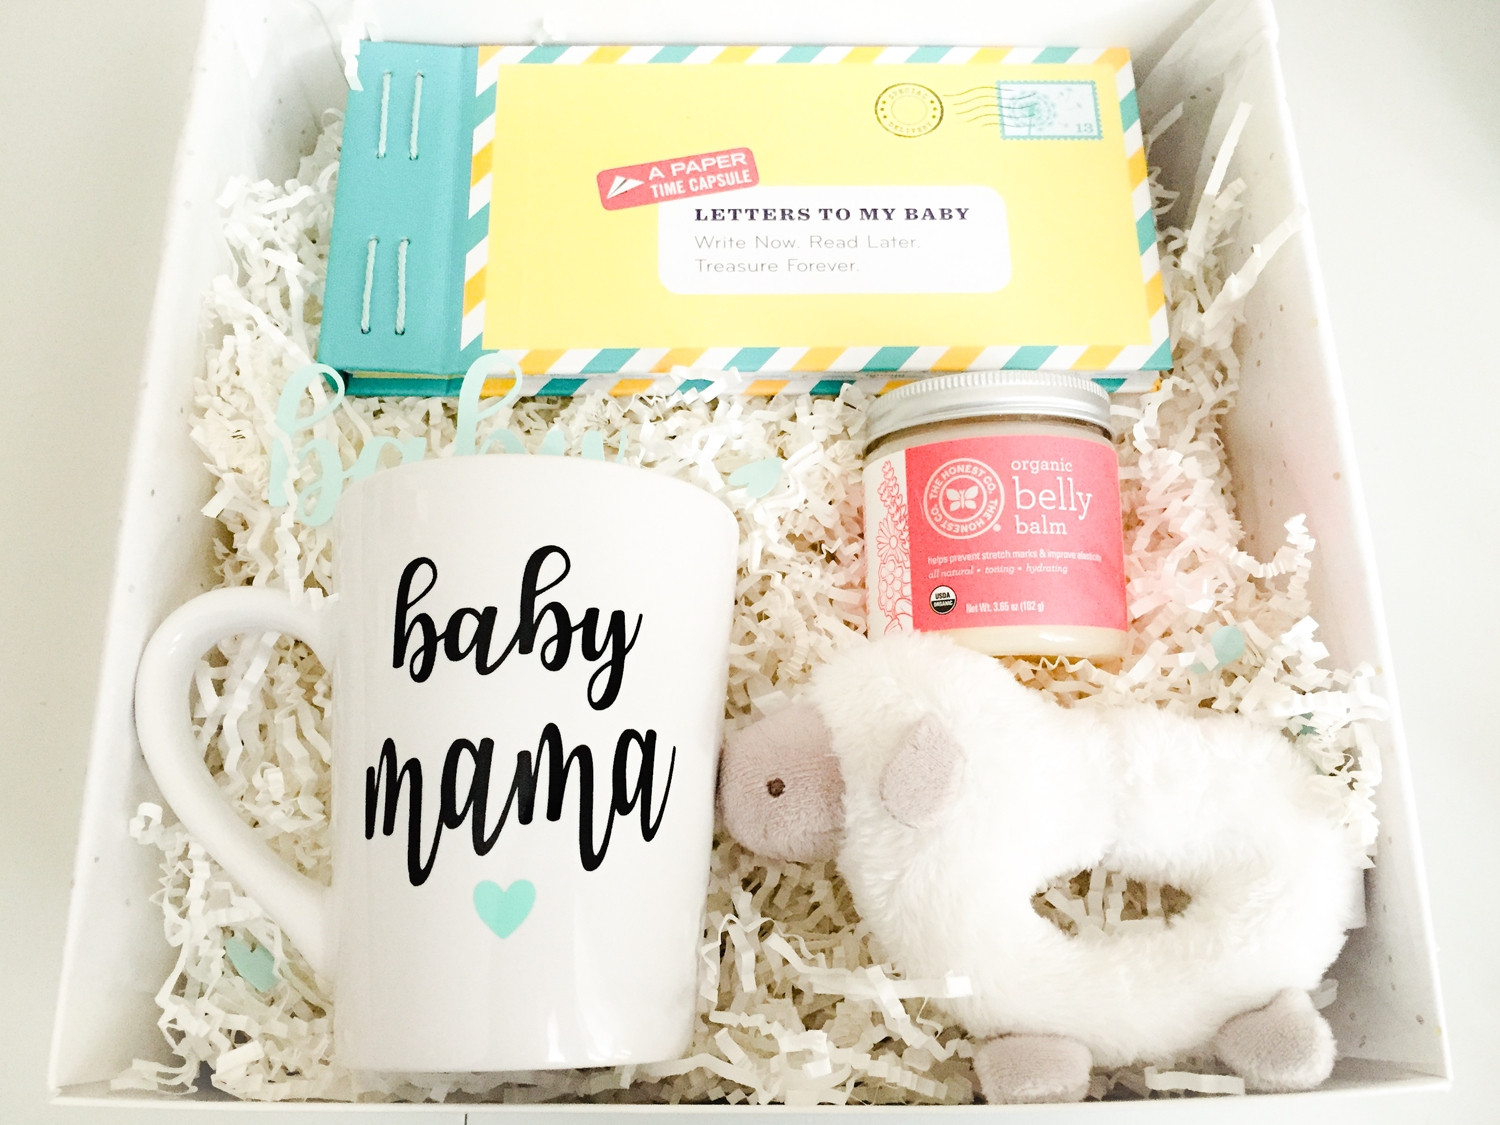 Expecting A Baby Gift
 10 Unique Gift Ideas For Expecting Parents 2019